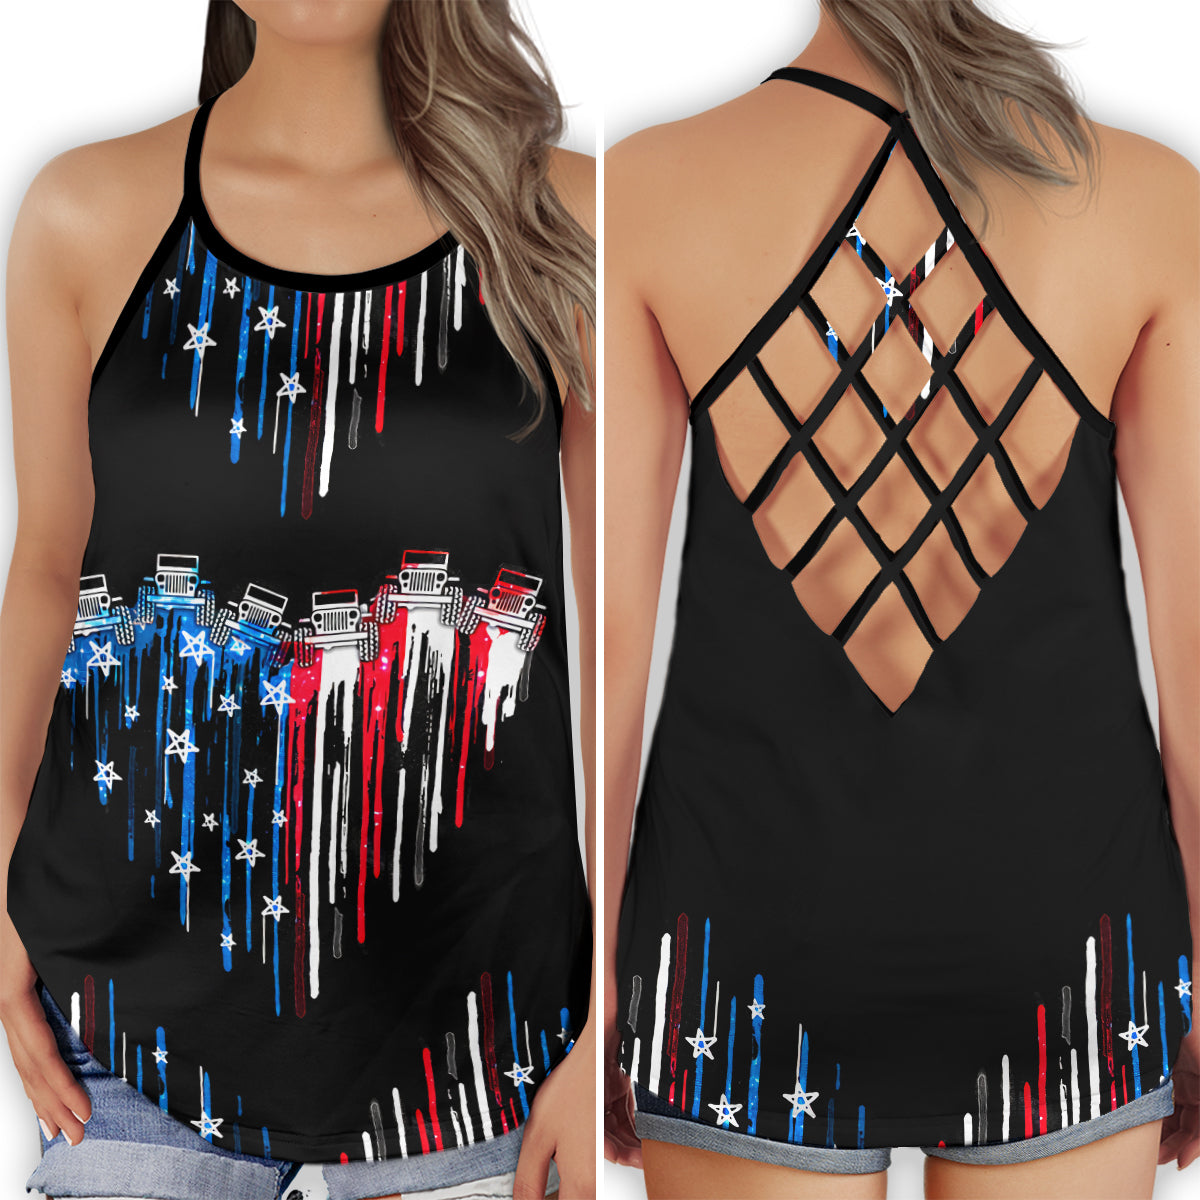 S America Independence Day Happiness Unique - Cross Open Back Tank Top - Owls Matrix LTD